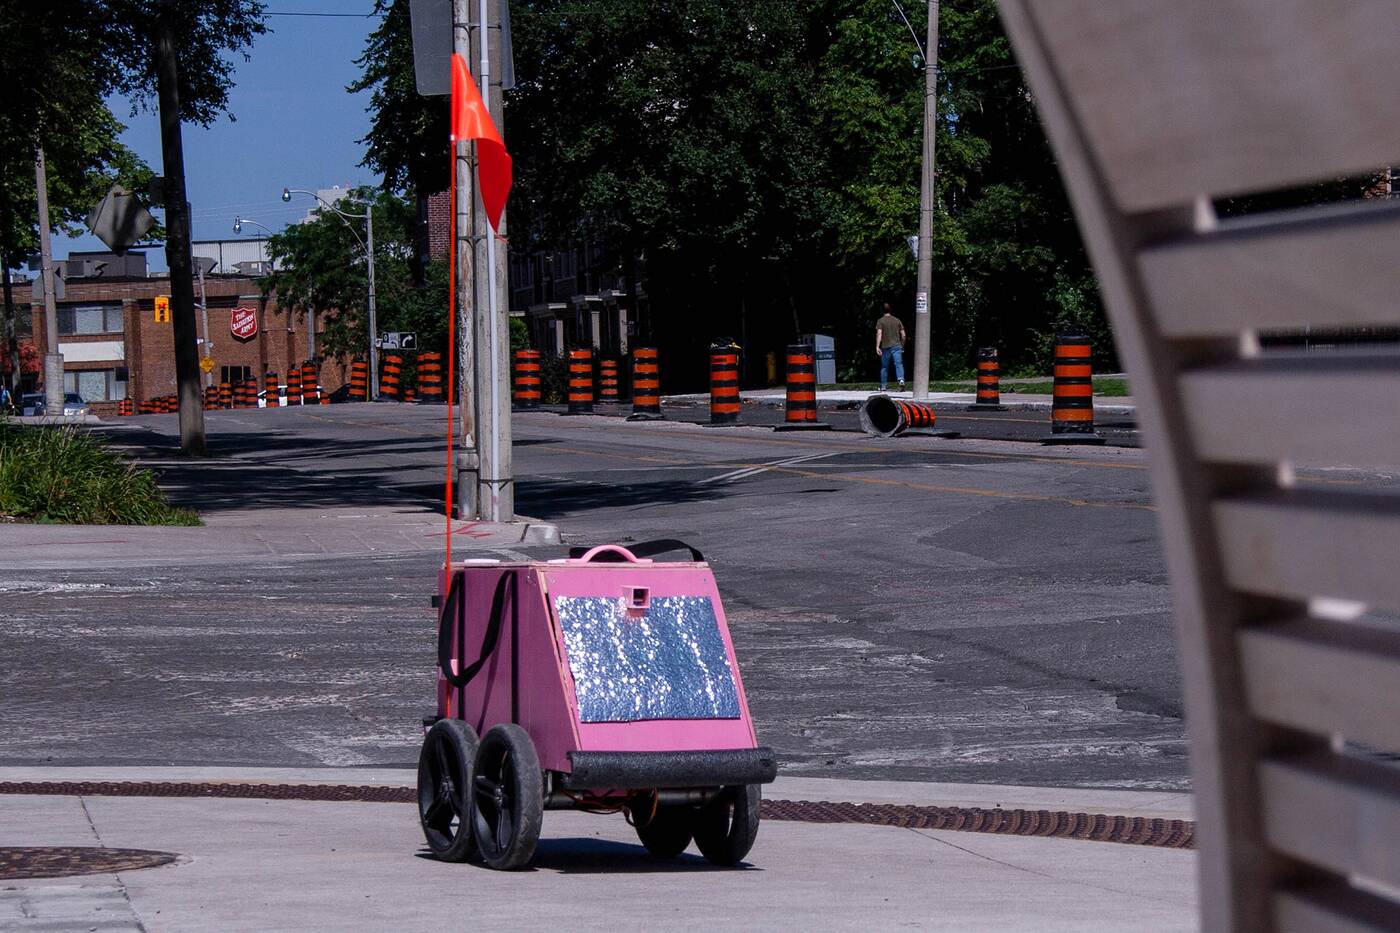 geoffrey the delivery robot